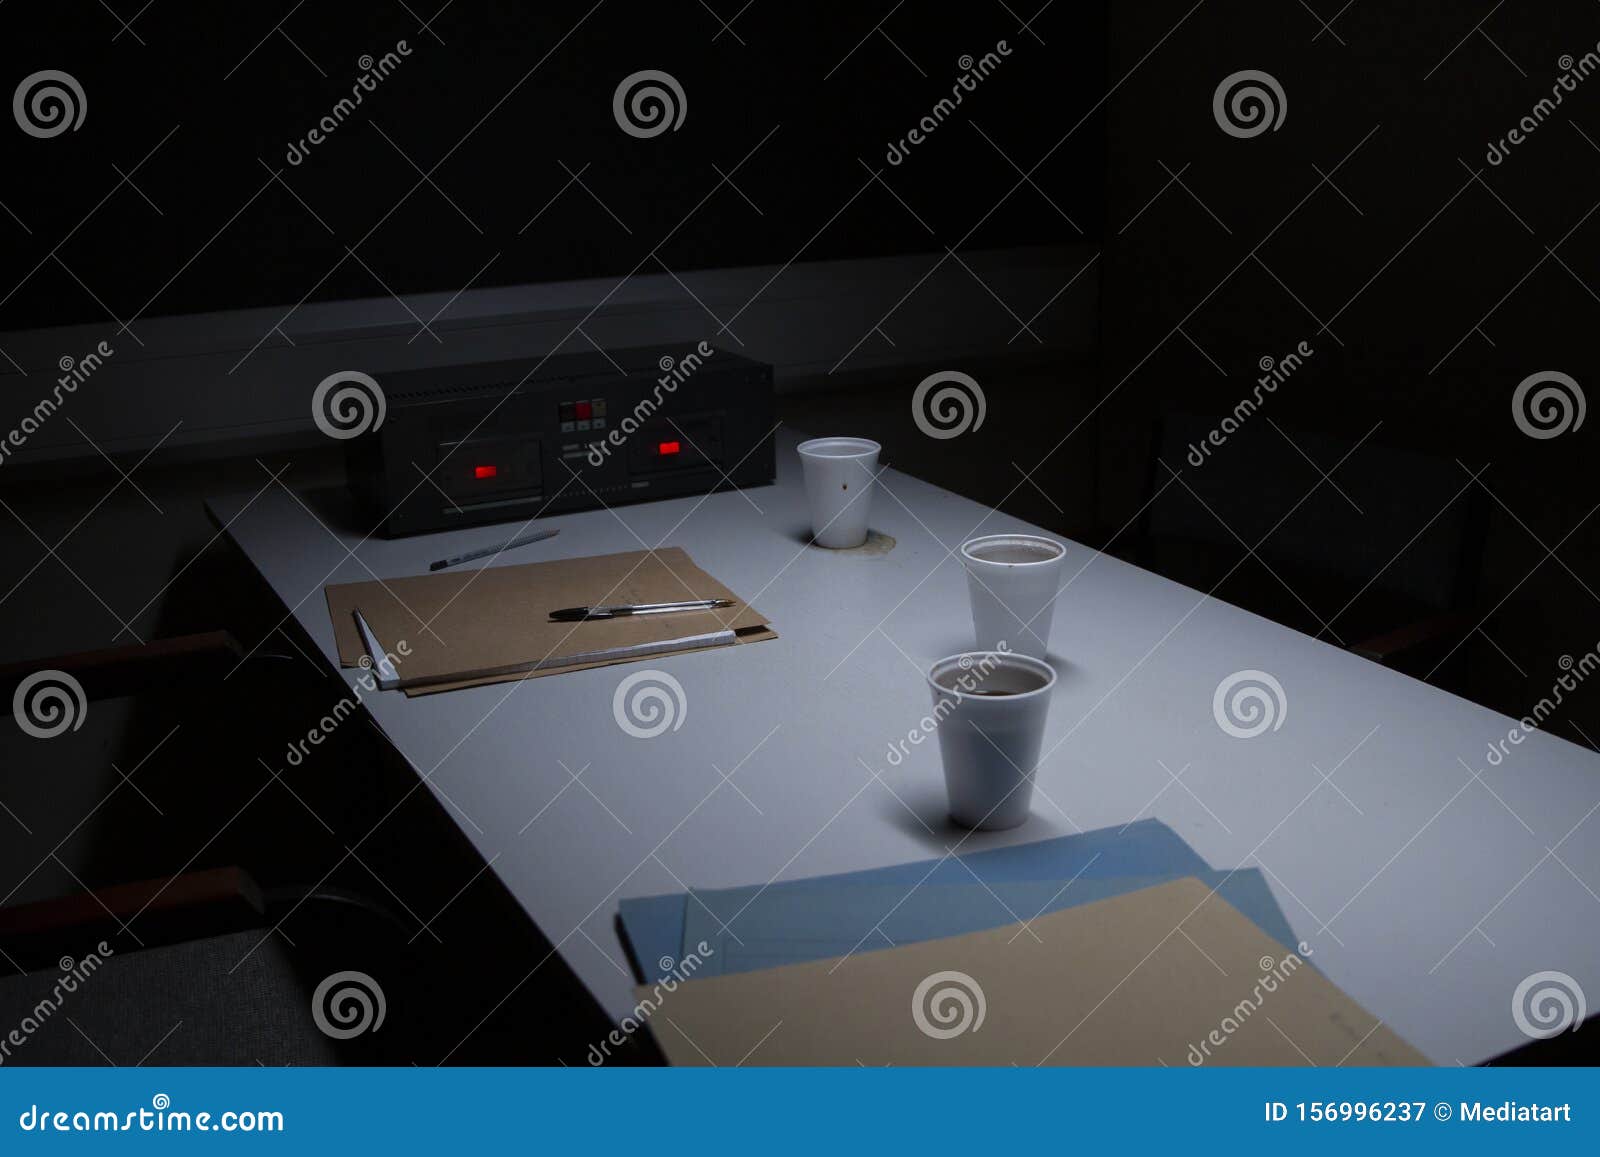 police custody interview room with coffee cups